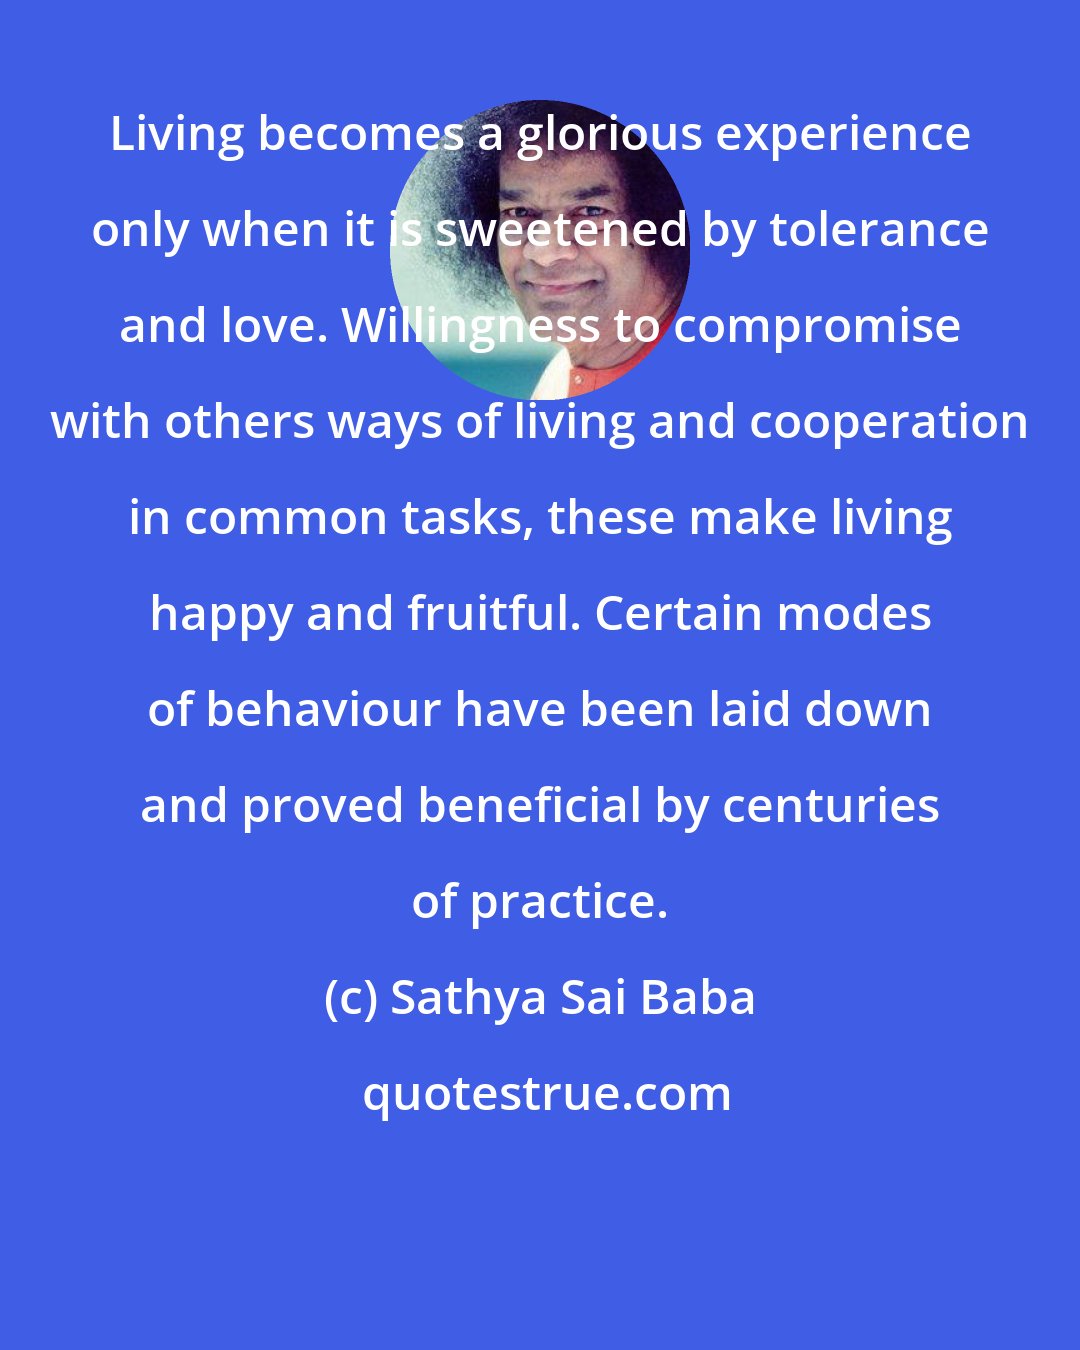 Sathya Sai Baba: Living becomes a glorious experience only when it is sweetened by tolerance and love. Willingness to compromise with others ways of living and cooperation in common tasks, these make living happy and fruitful. Certain modes of behaviour have been laid down and proved beneficial by centuries of practice.